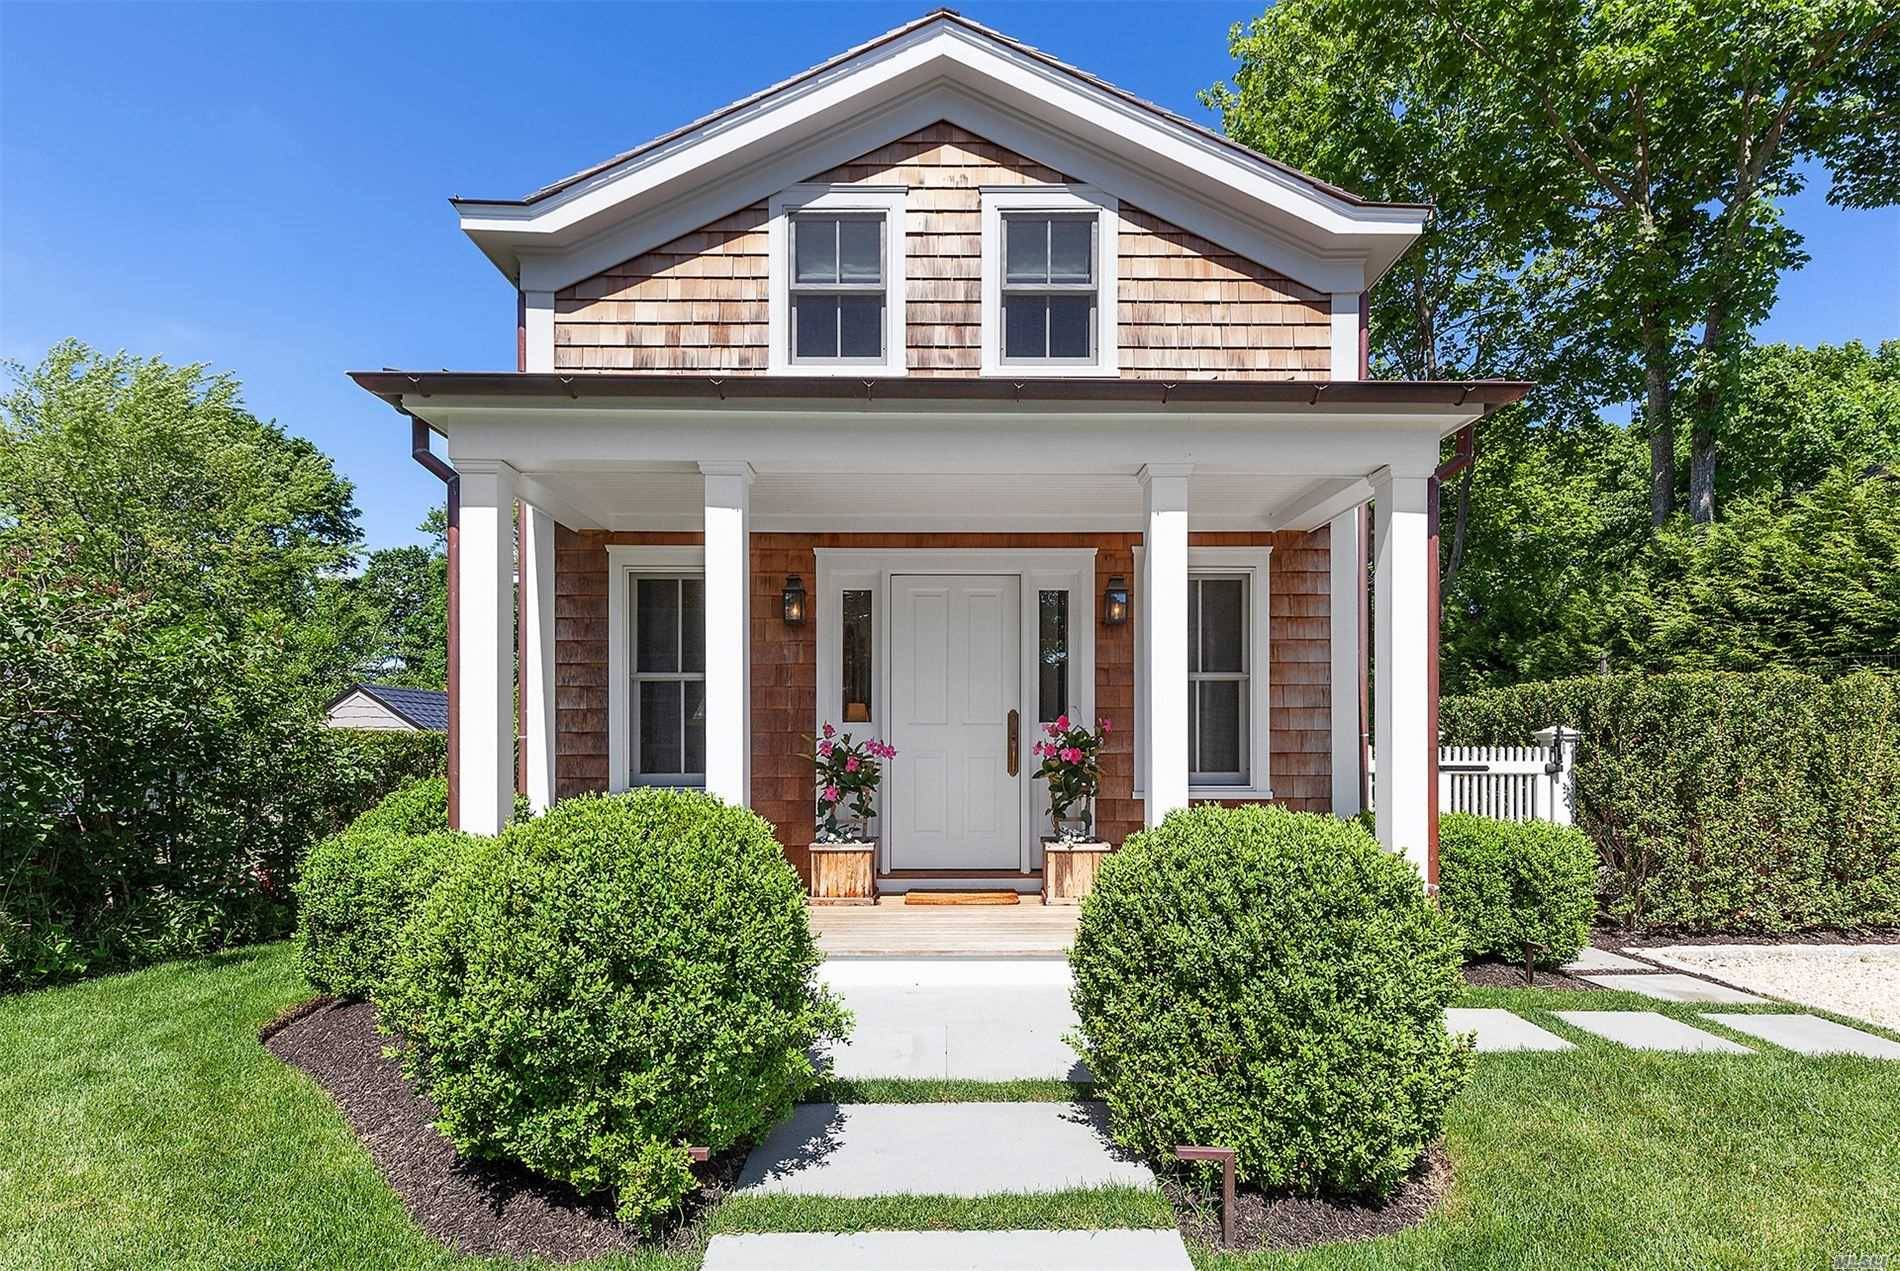 Located in Sag Harbor Village this newly renovated, 3 bedroom, 3.